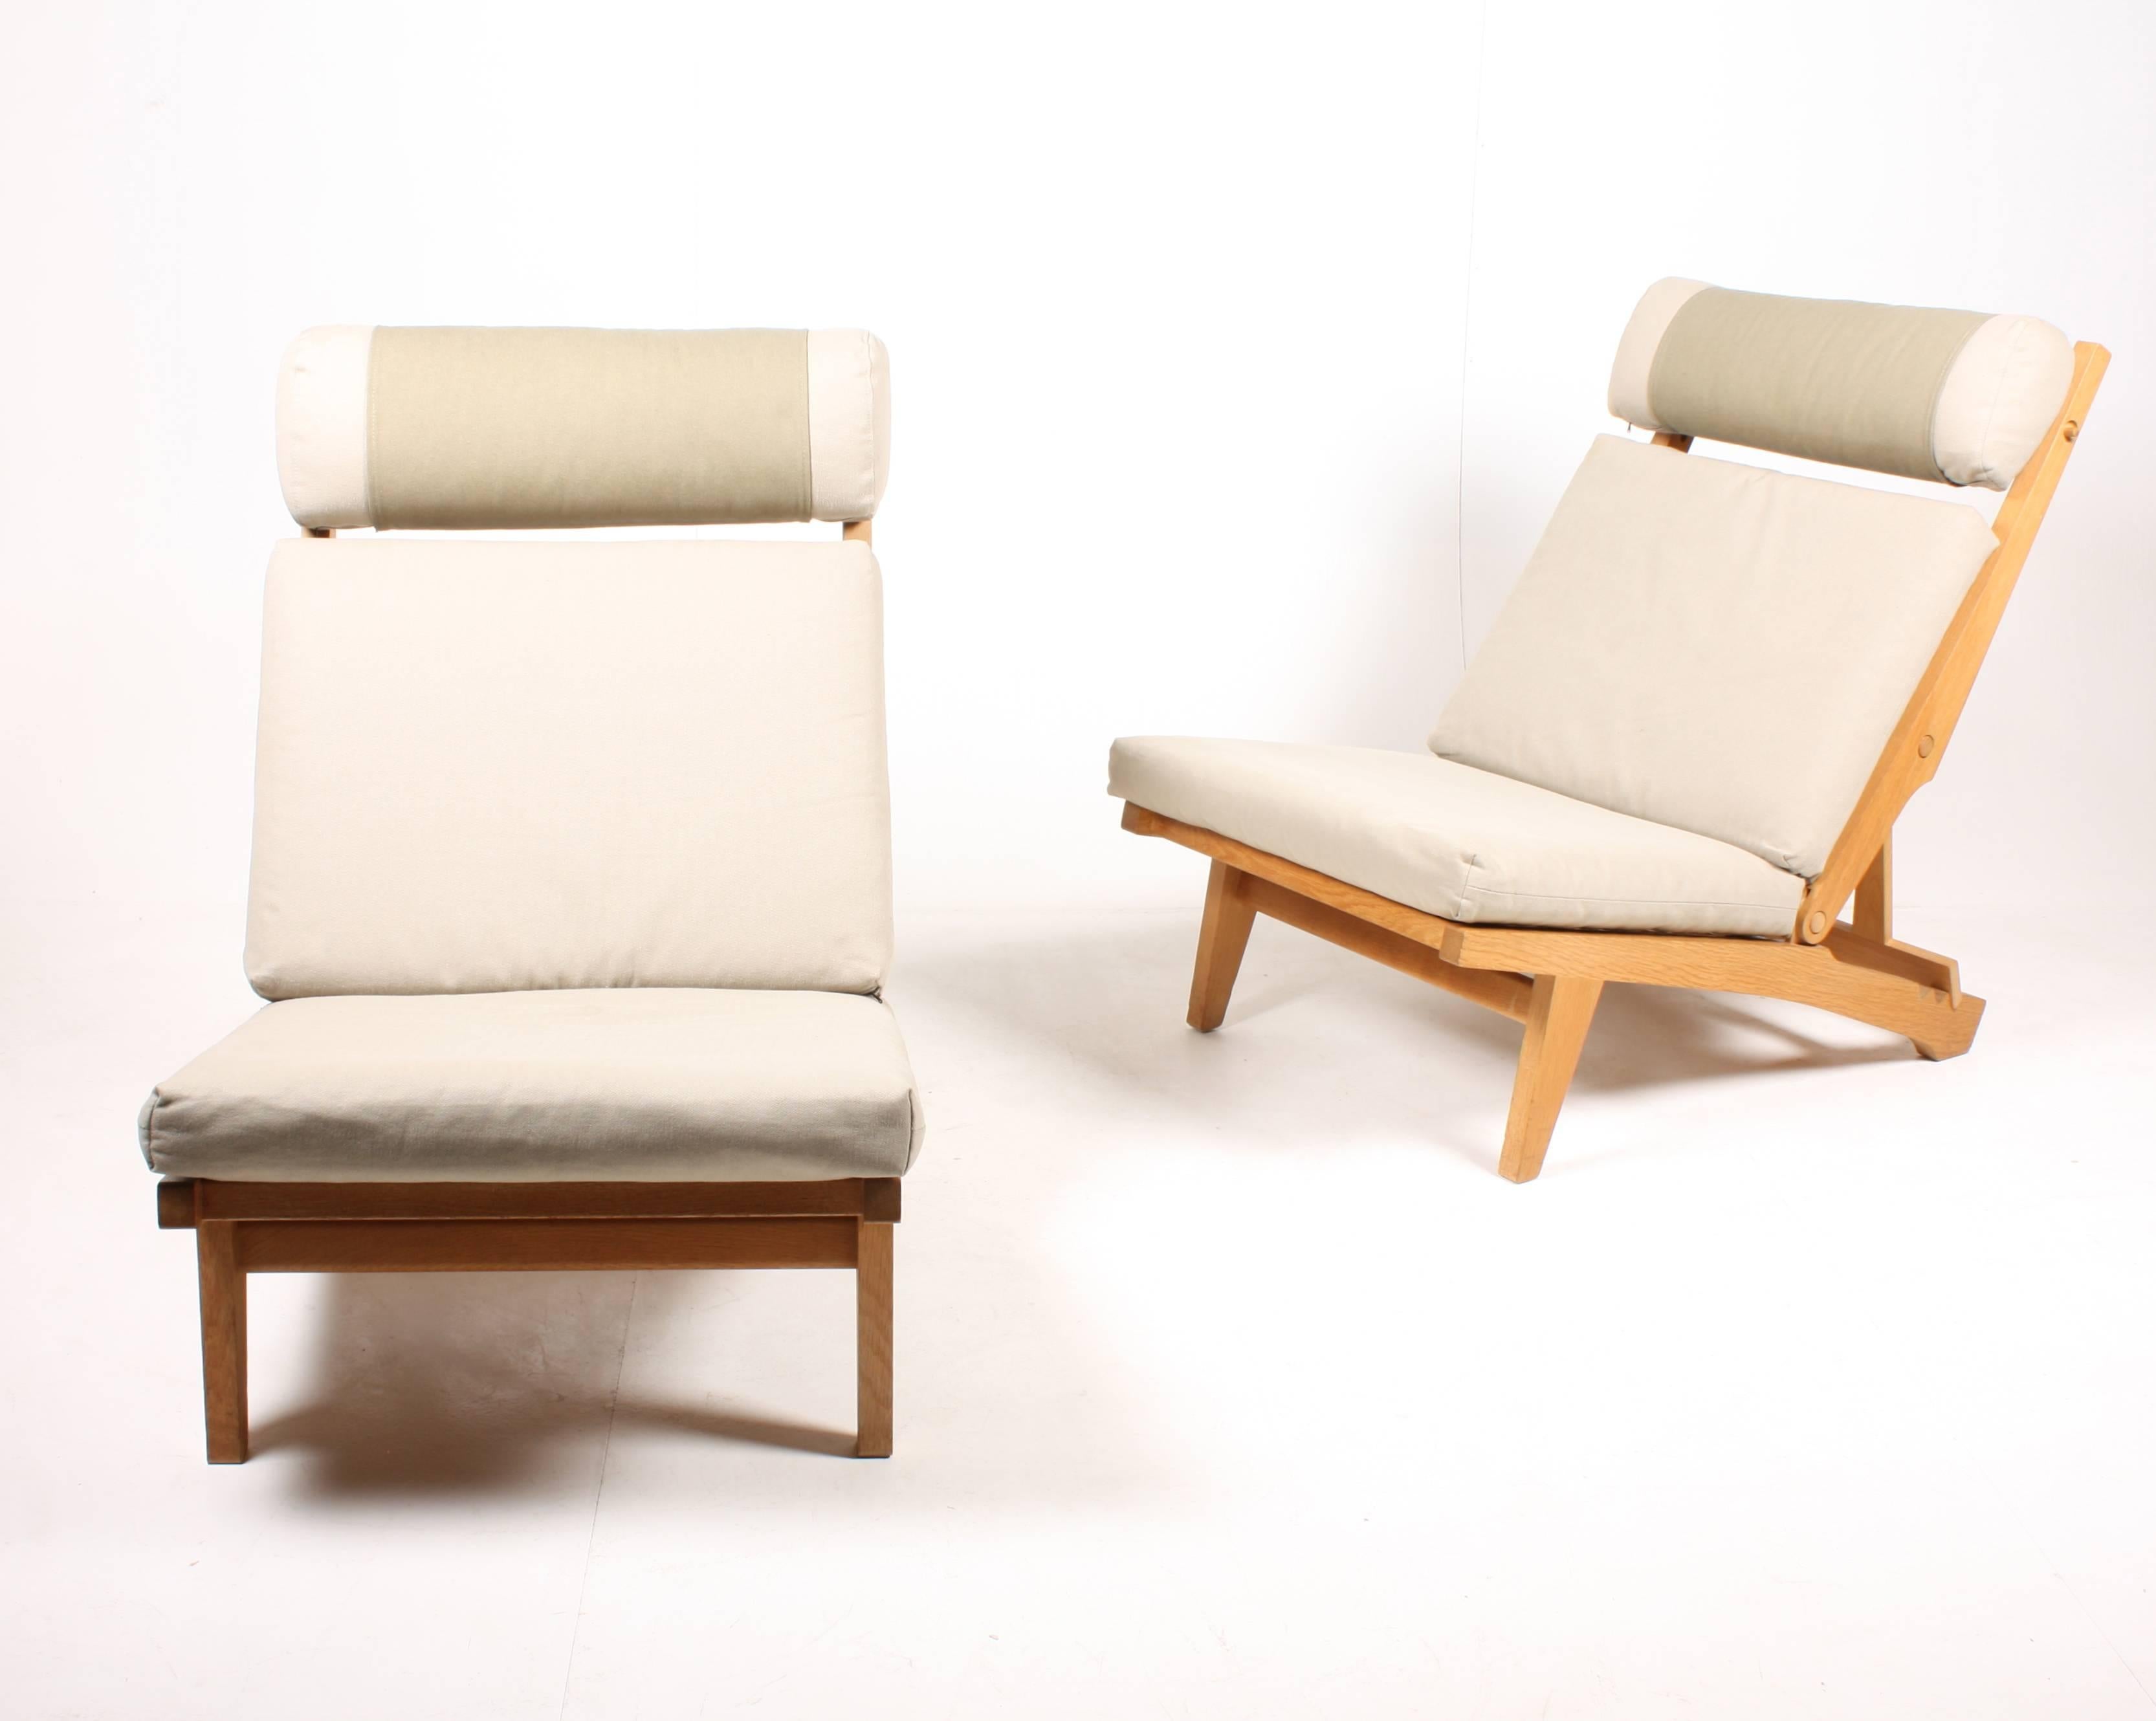 Pair of AP71 folding chairs in solid oak with canvas upholstery. Designed by Hans J Wegner for AP stolen Valby in the 1968. Great original condition.
A rare folding oak frame lounge chair with an adjustable back and headrest. The design of the AP